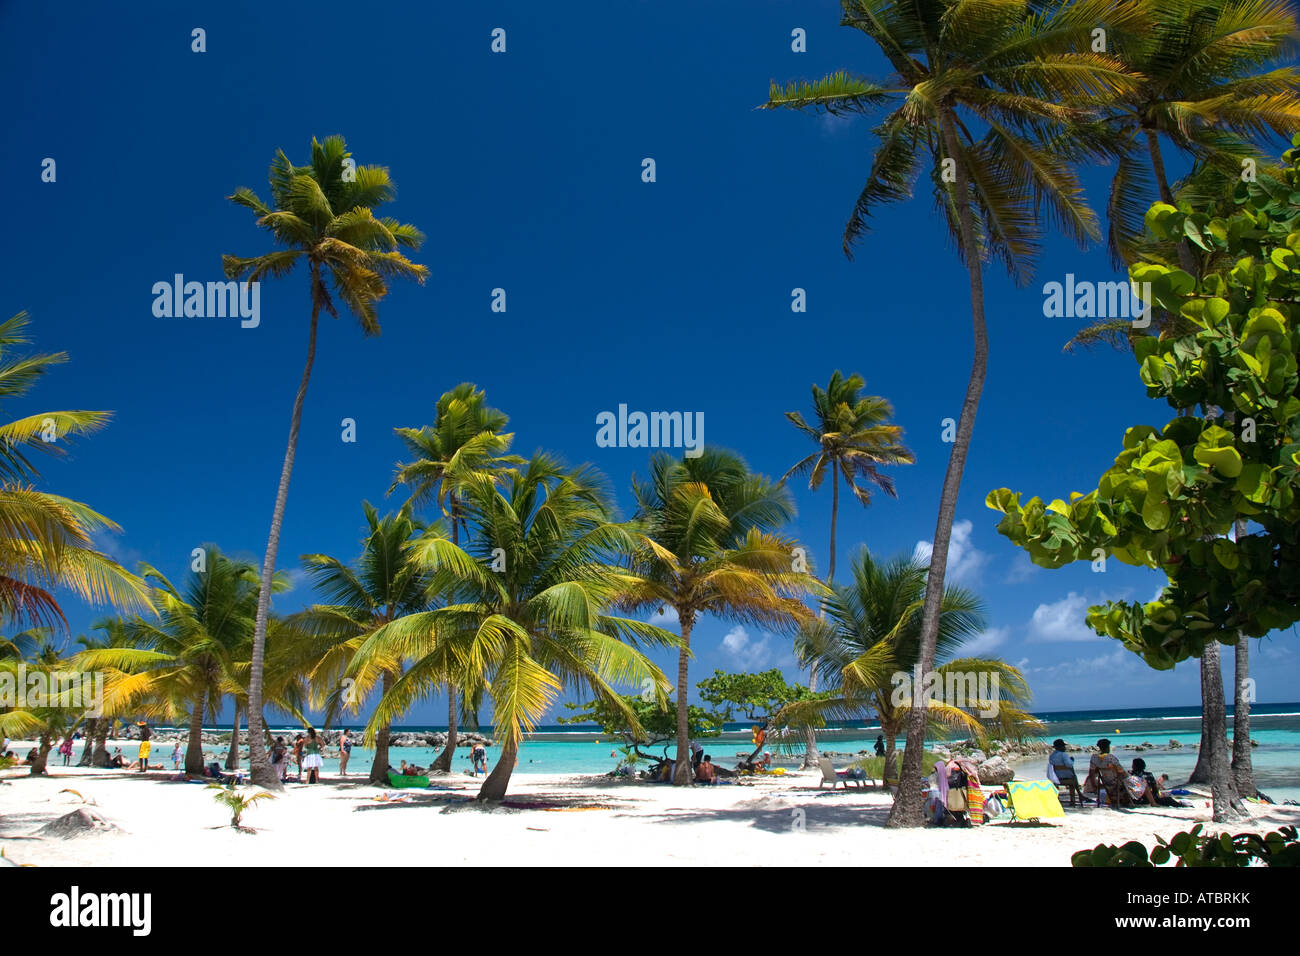 Guadalupe beach palm trees, paradise, tropical island, white sand, blue sky, summer, holiday, vacation, relax, caribean Stock Photo